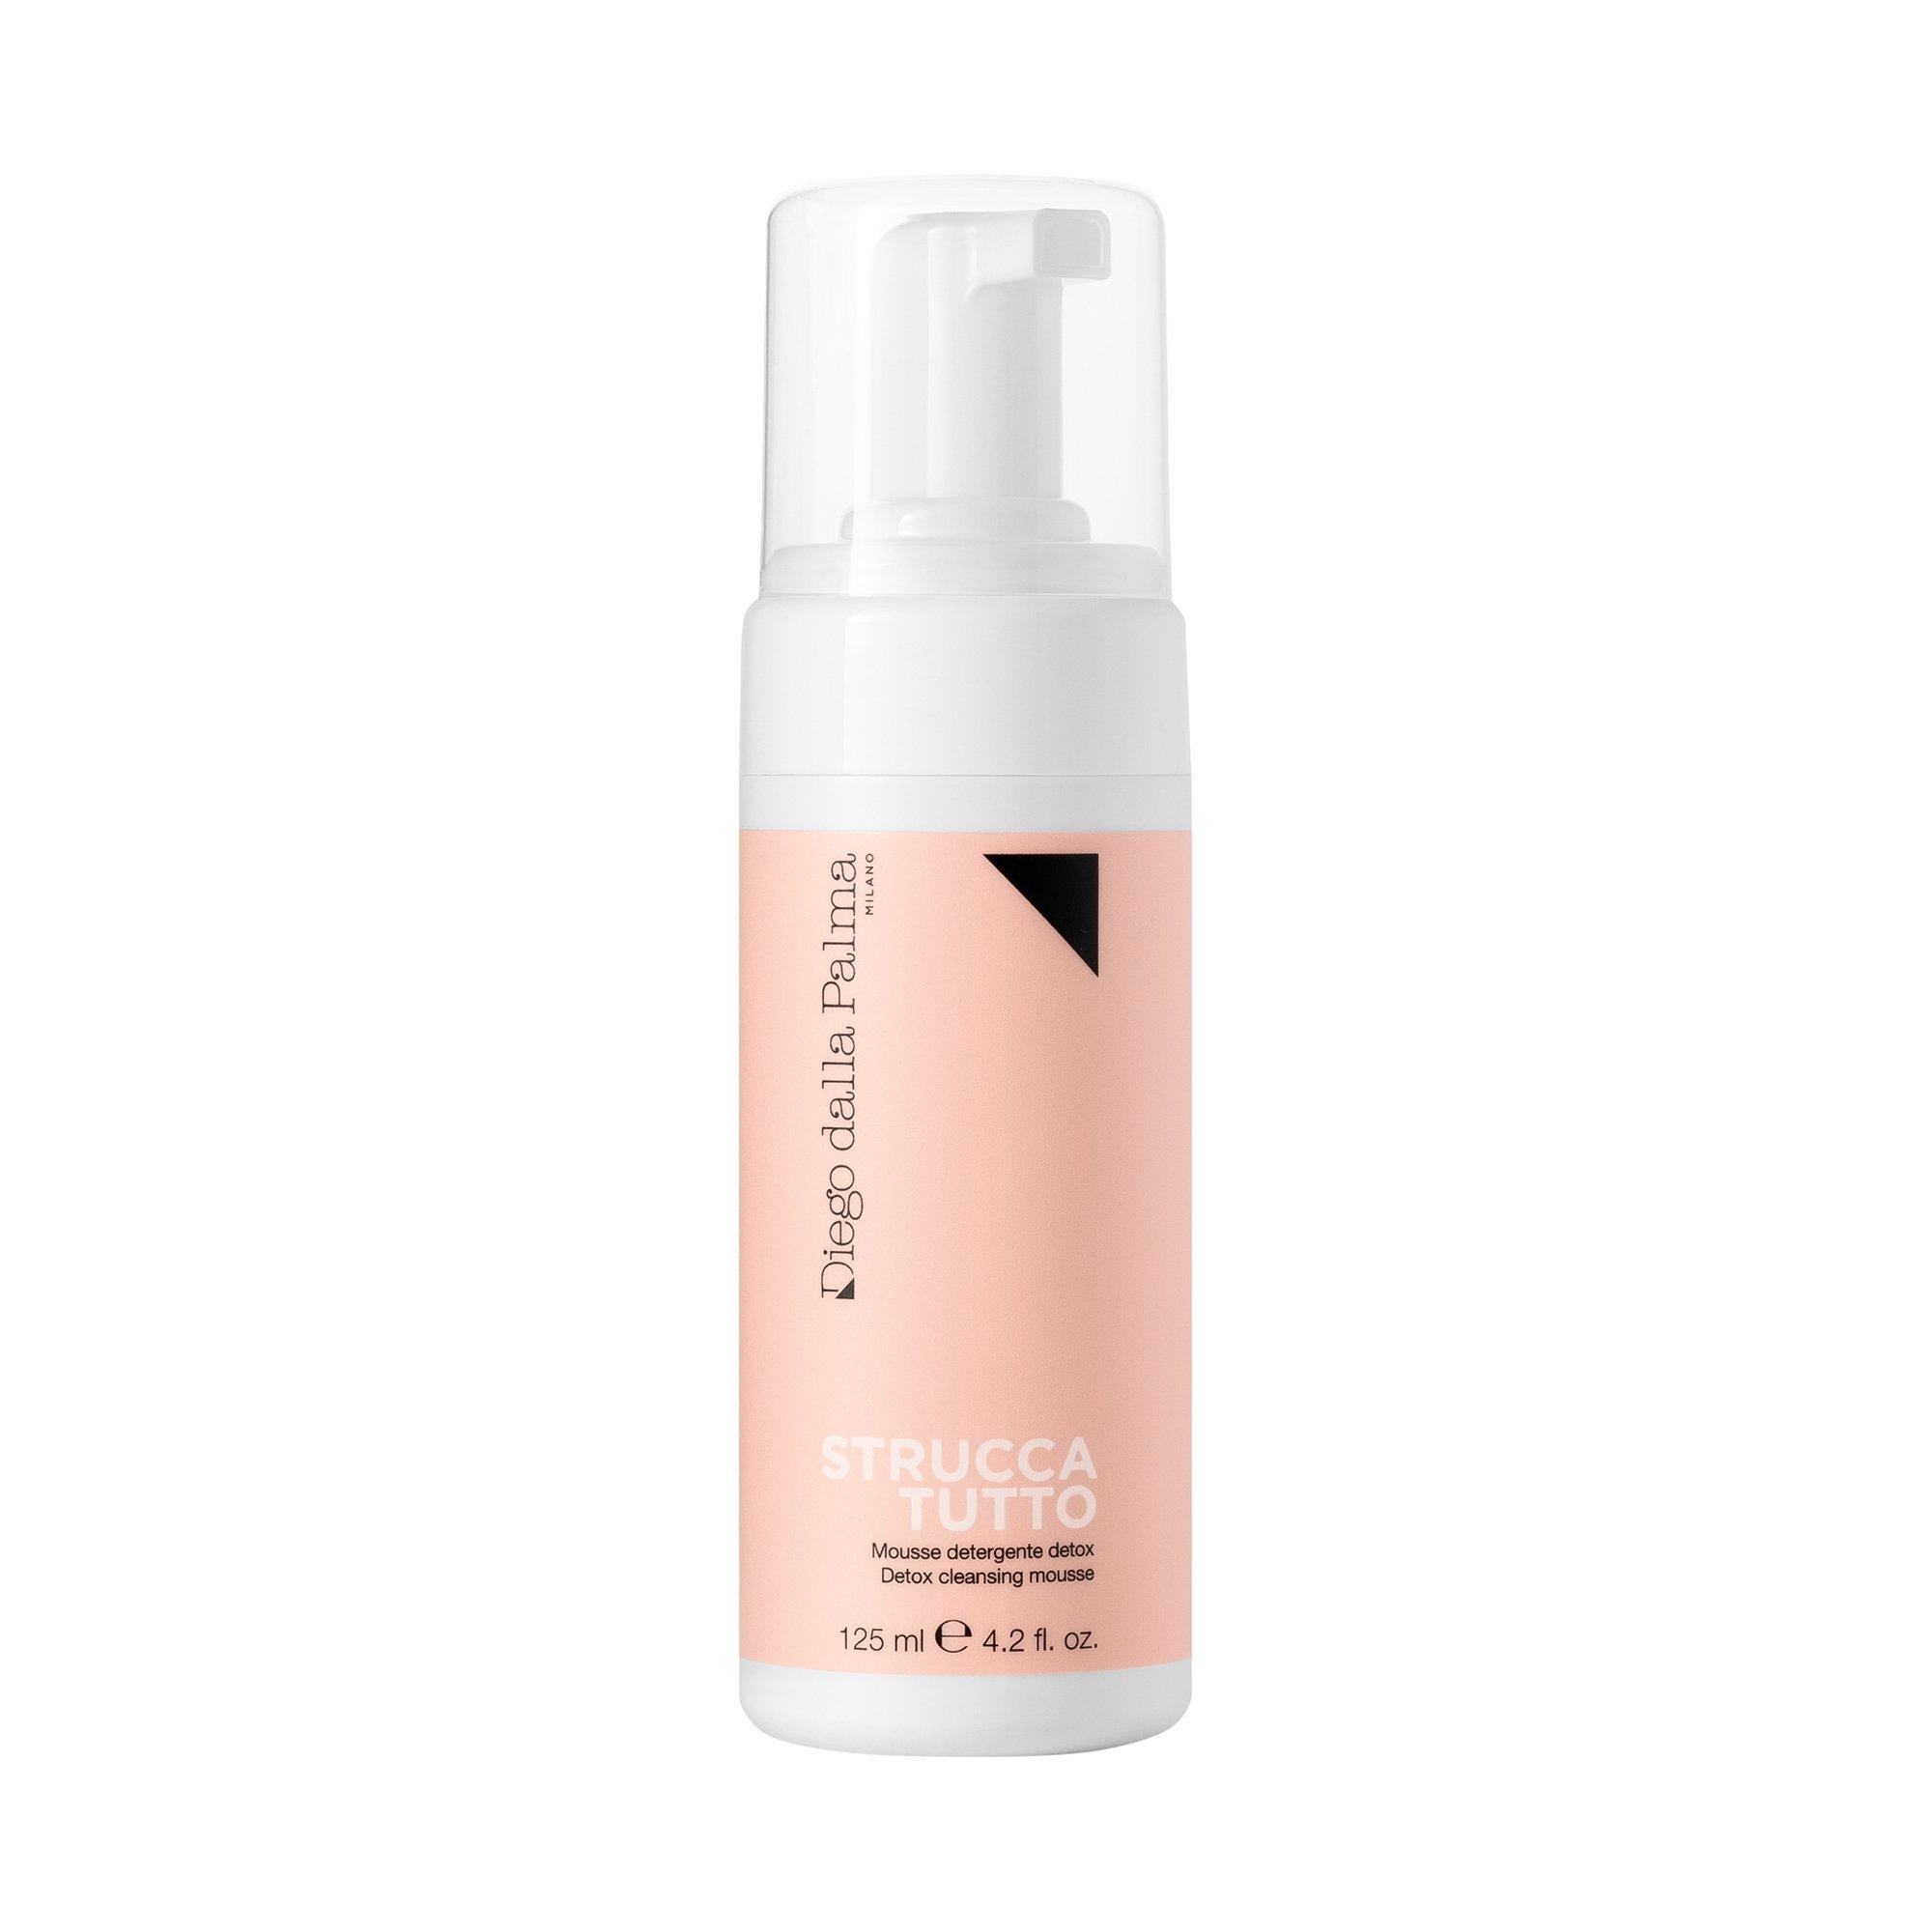 Image of diego dalla palma Struccatutto Cleansing Detoxing Mousse - 125ml